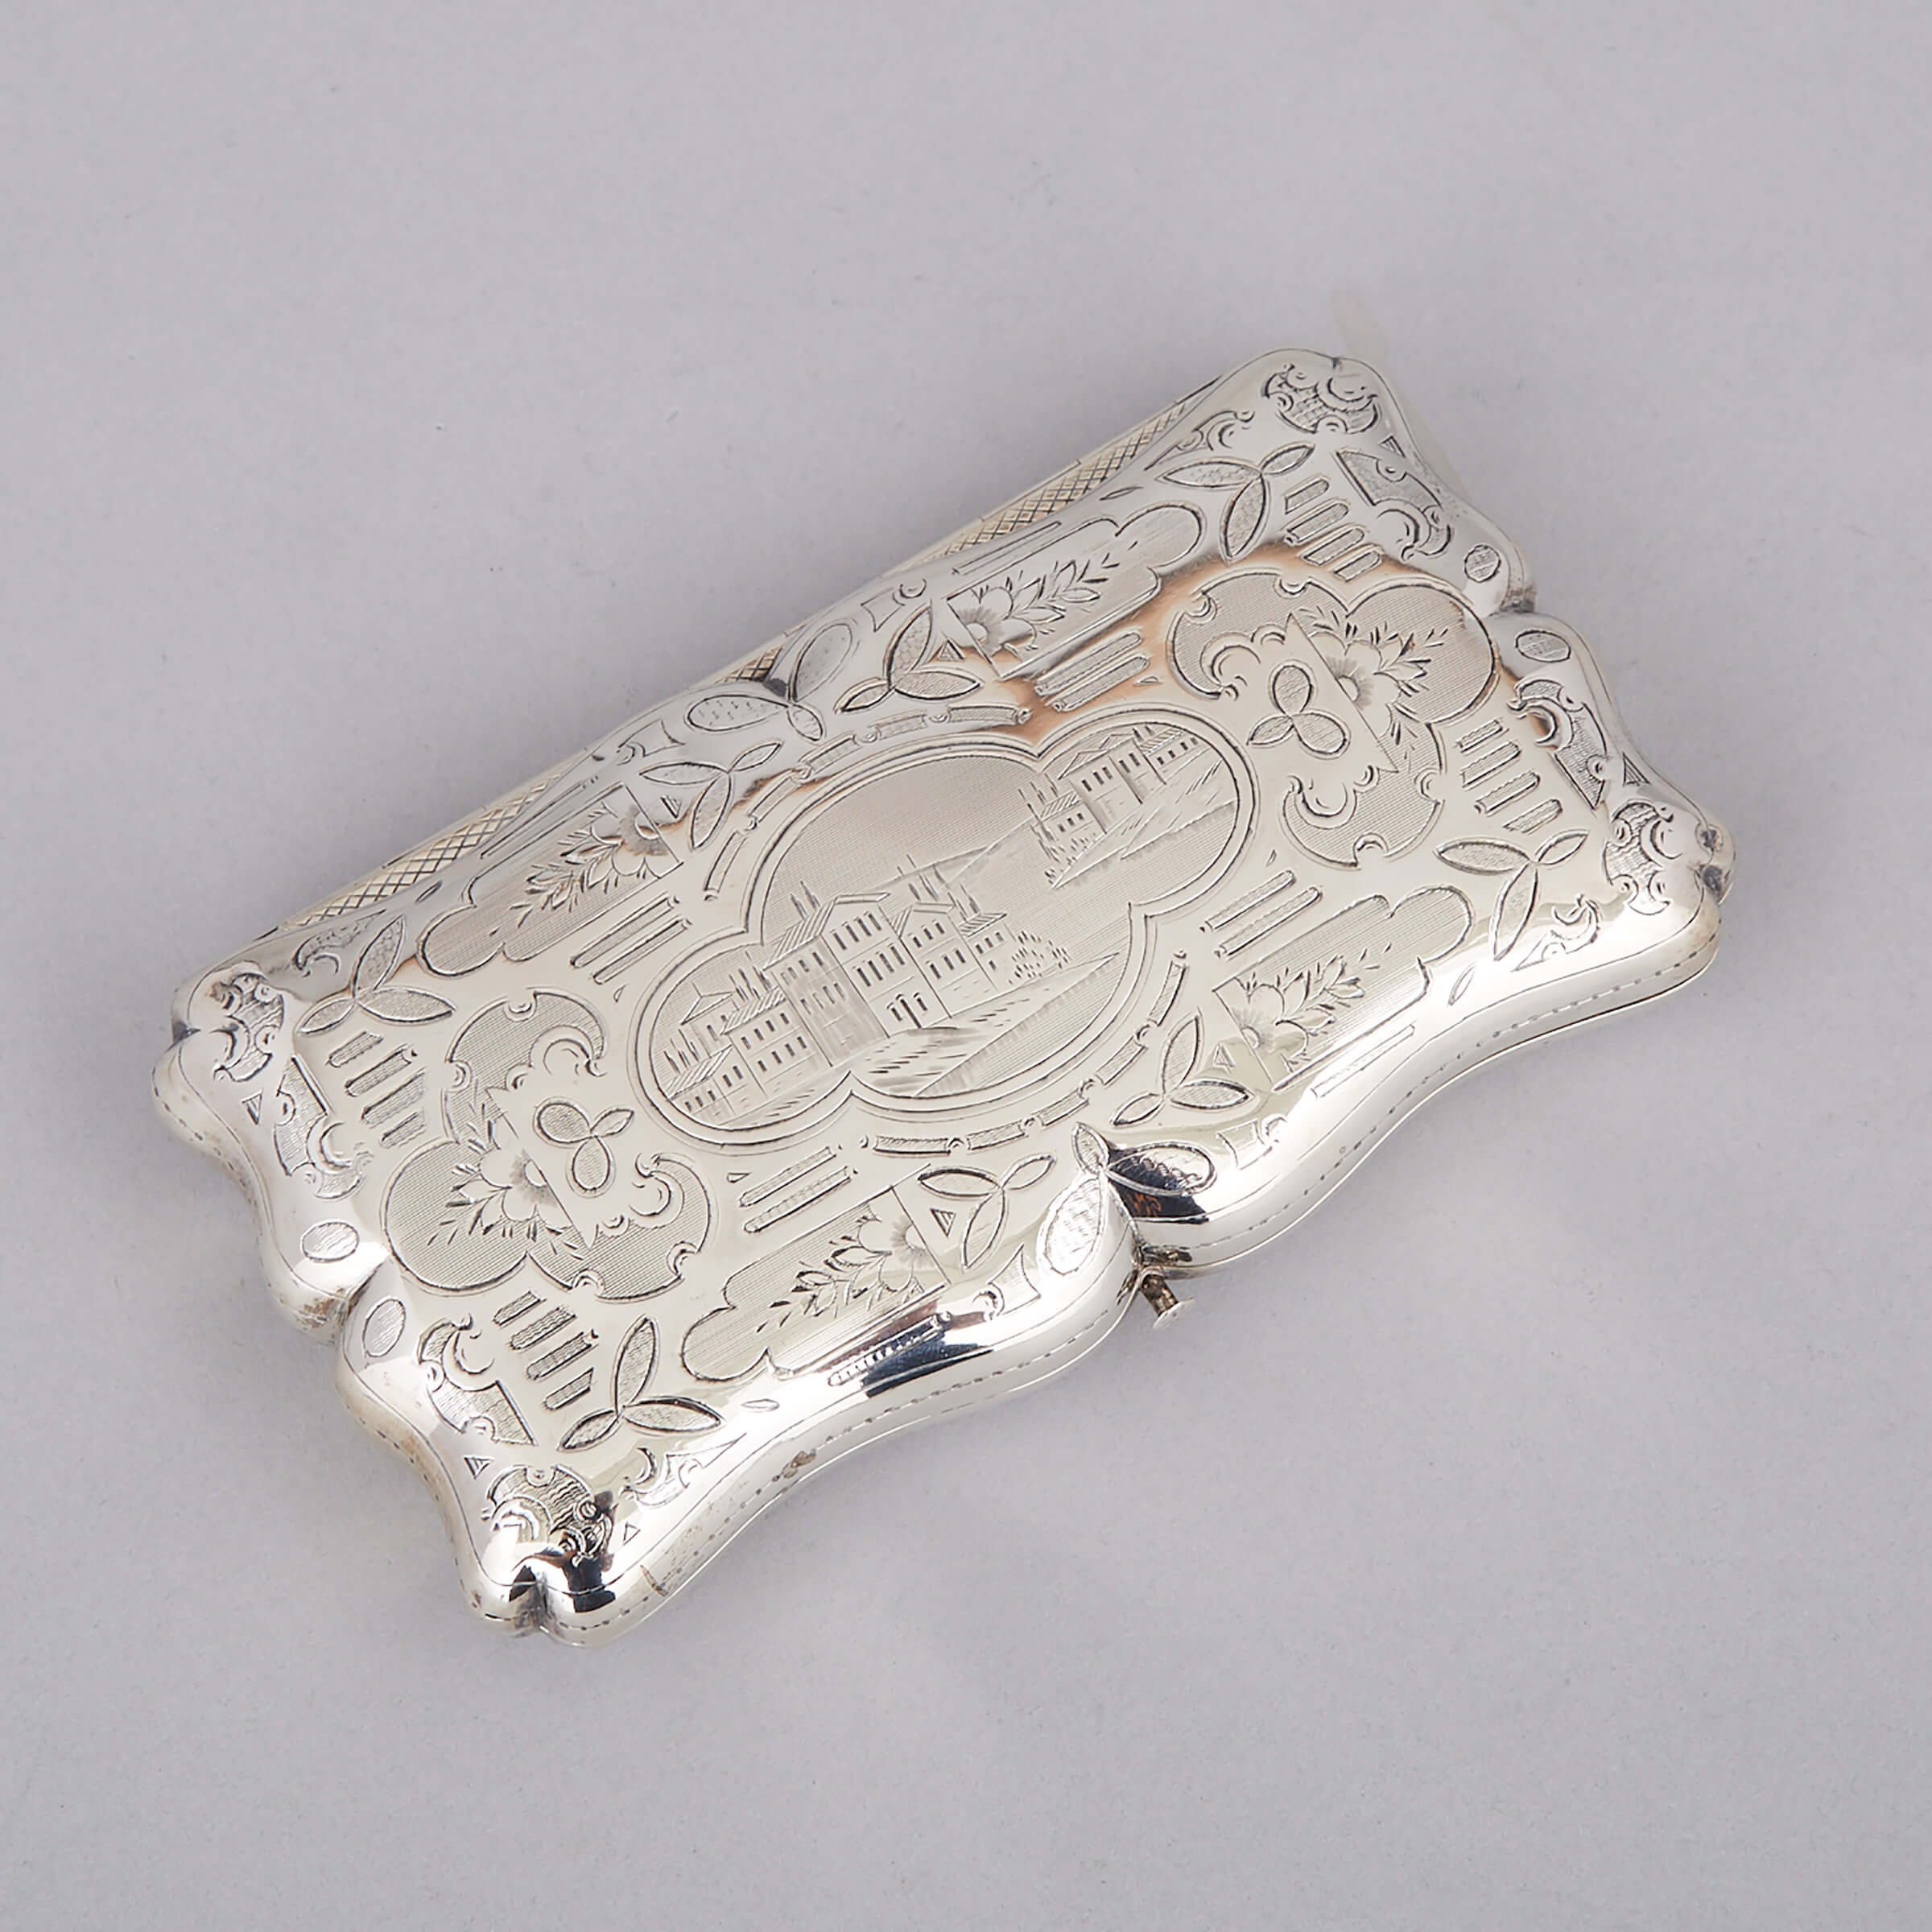 French Silver Engraved Cheroot Case, probably Jean Cheroux, Paris, c.1880